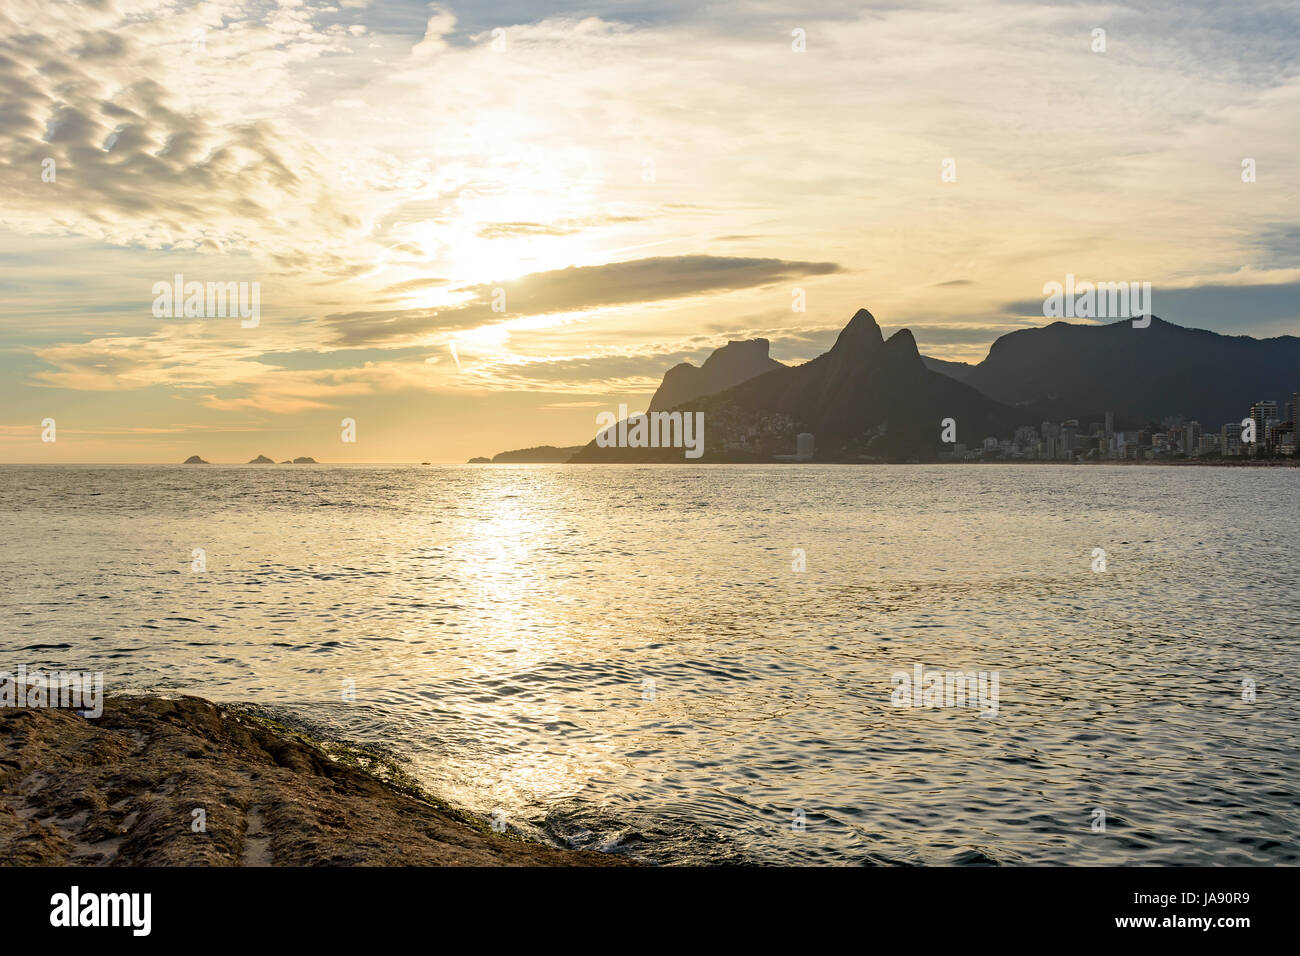 Arpoador beach in Rio de Janeiro, with its stones, buildings and the seaside during sunset and the Two Brothers hill in background Stock Photo